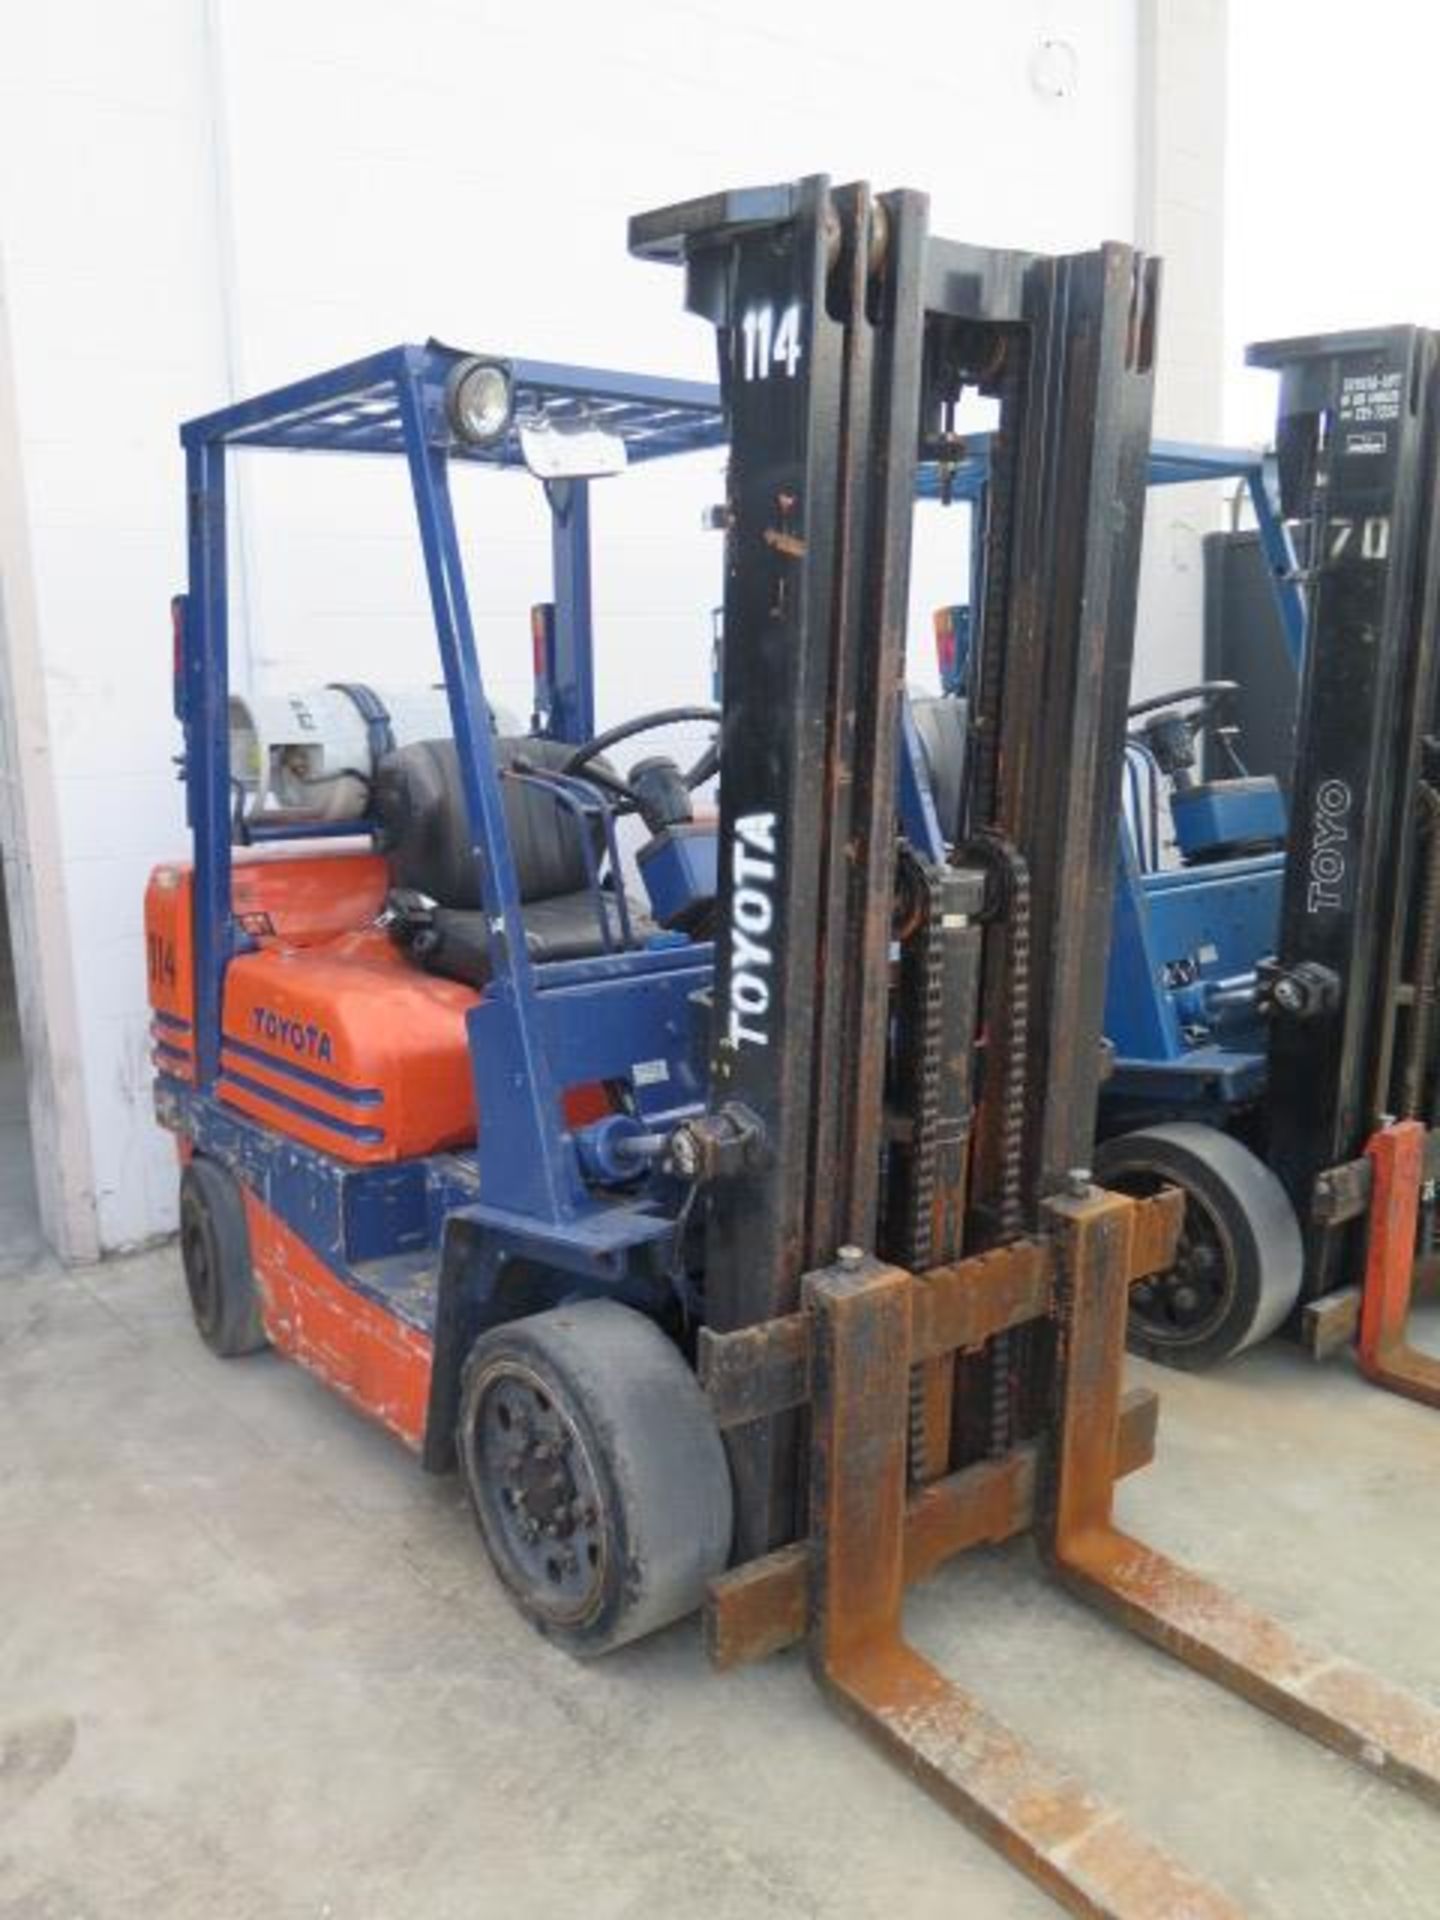 Toyota 5FGC30 6000 Lb Cap LPG Forklift s/n 10432 w/ 3-Stage Mast, 169" Lift Height, Cushion Tires, - Image 2 of 11